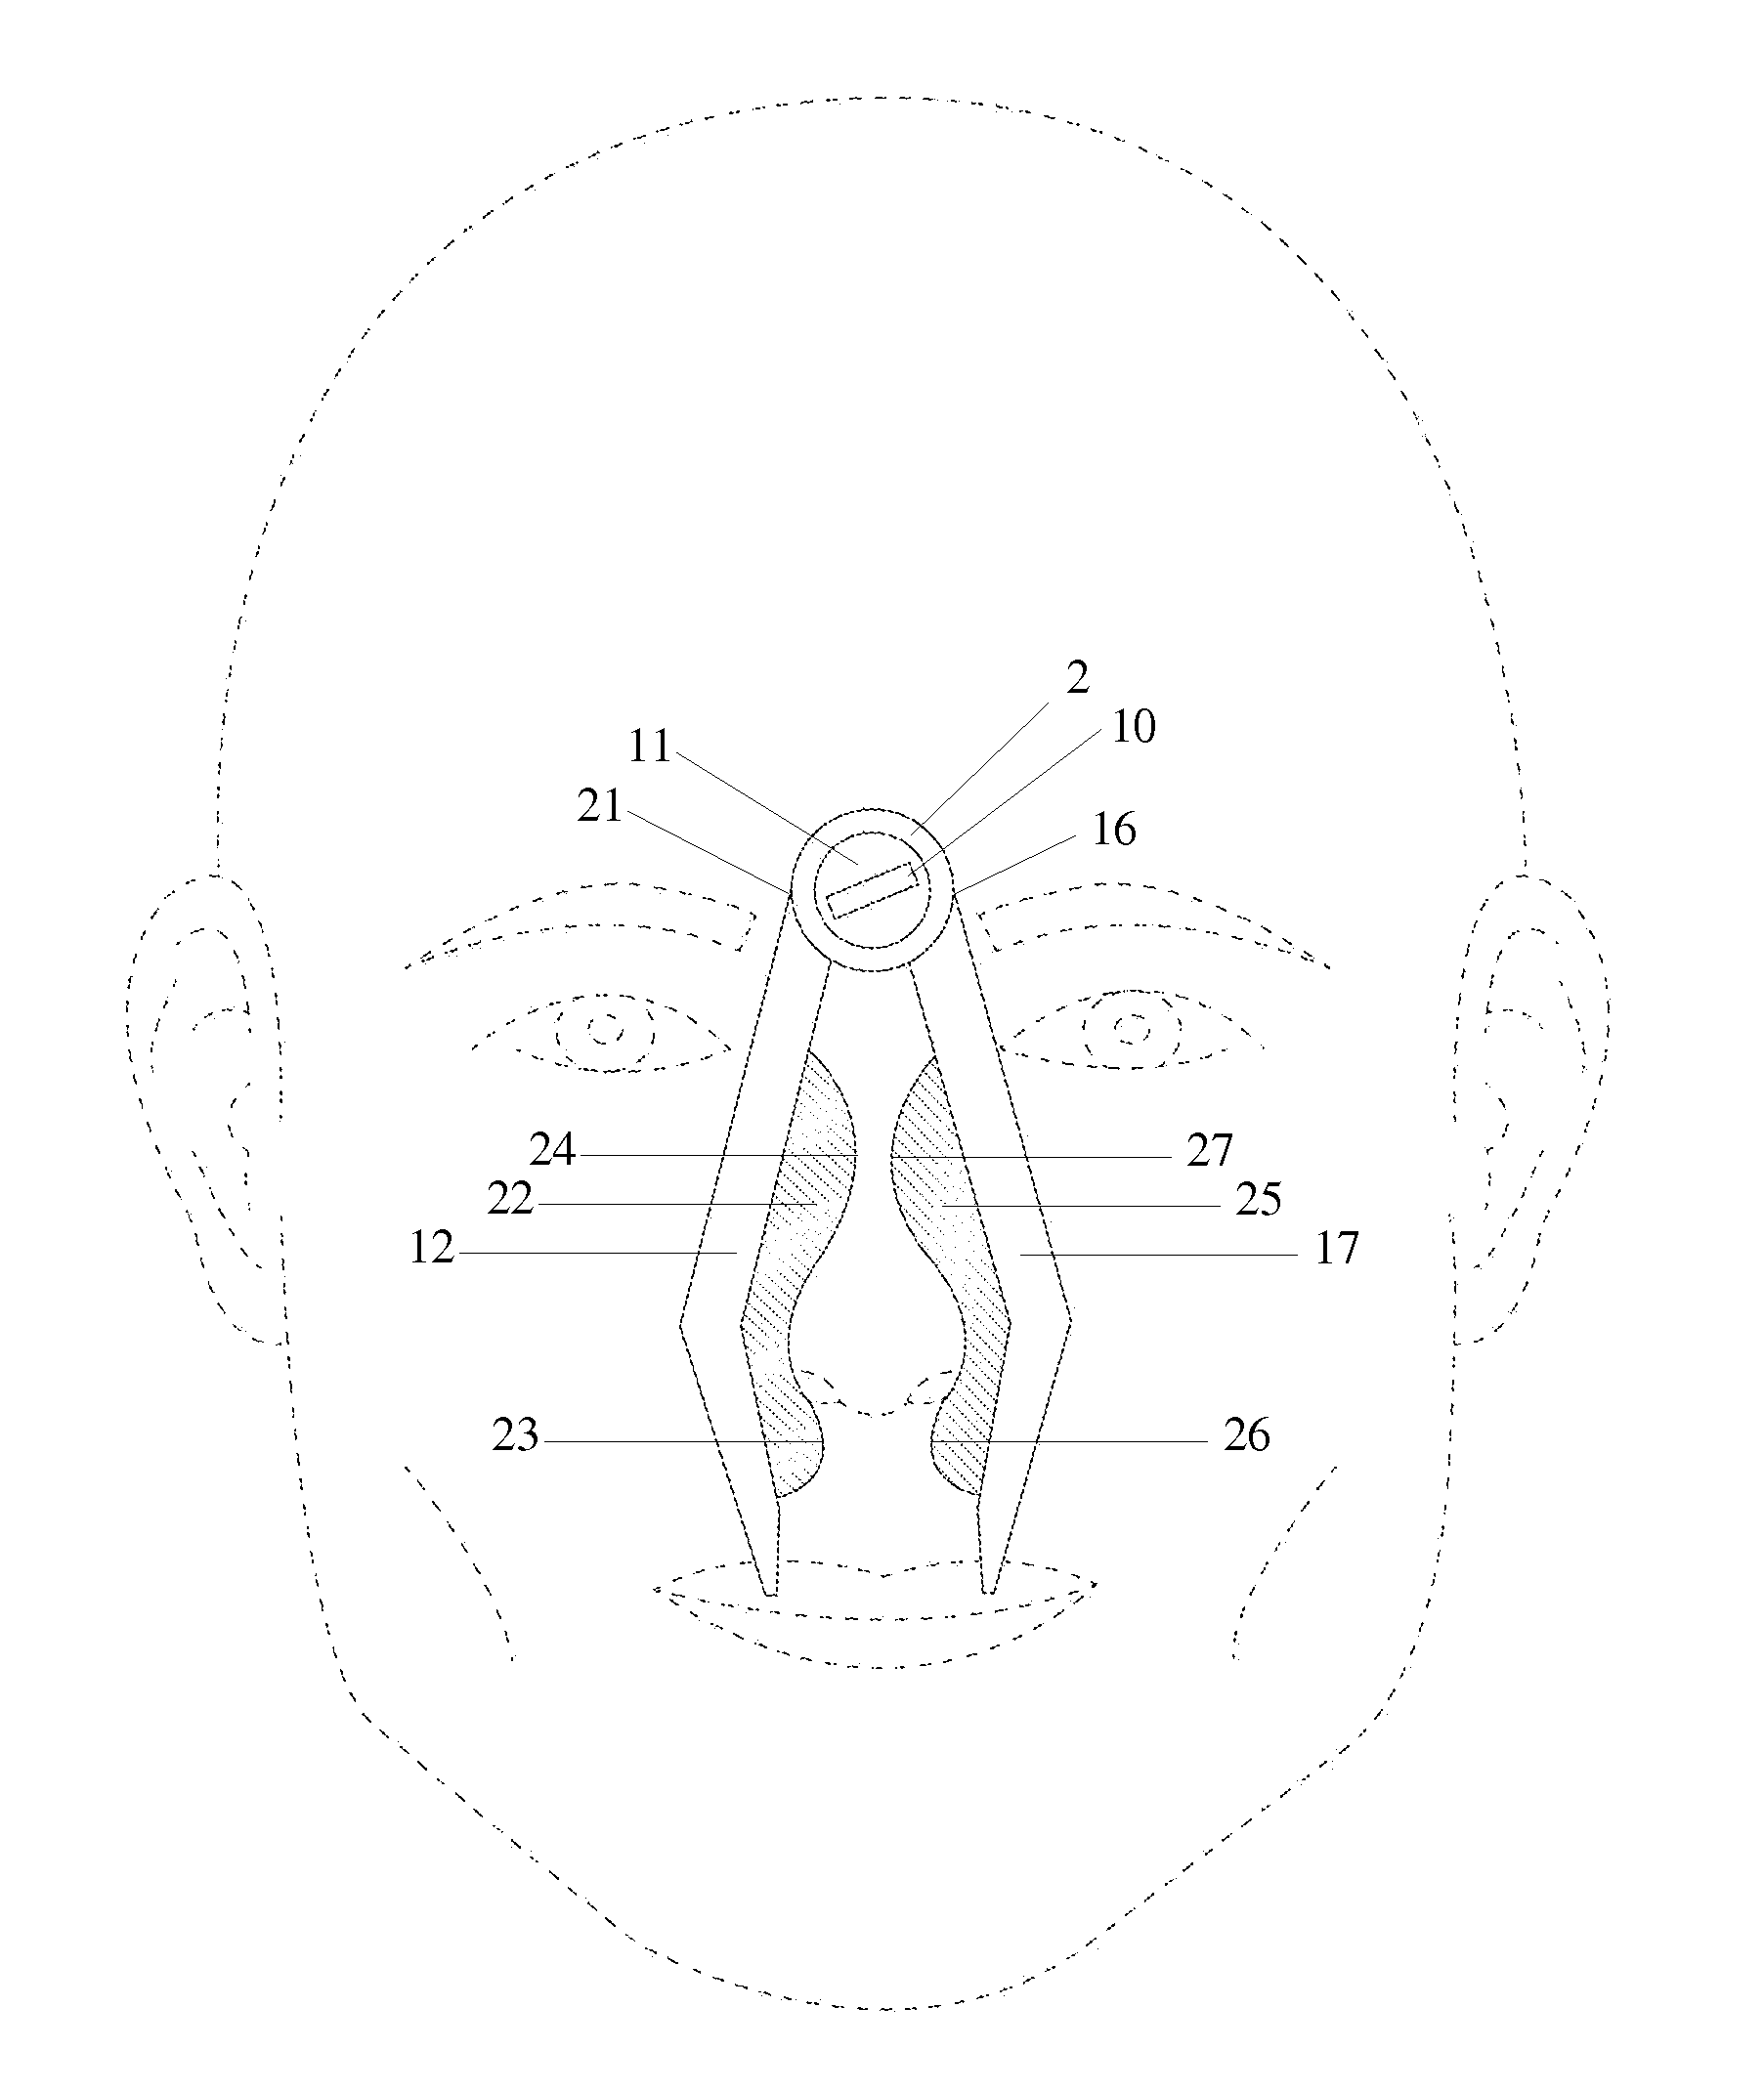 Adjustable locking forceps device for the treatment of anterior epistaxis and method of use